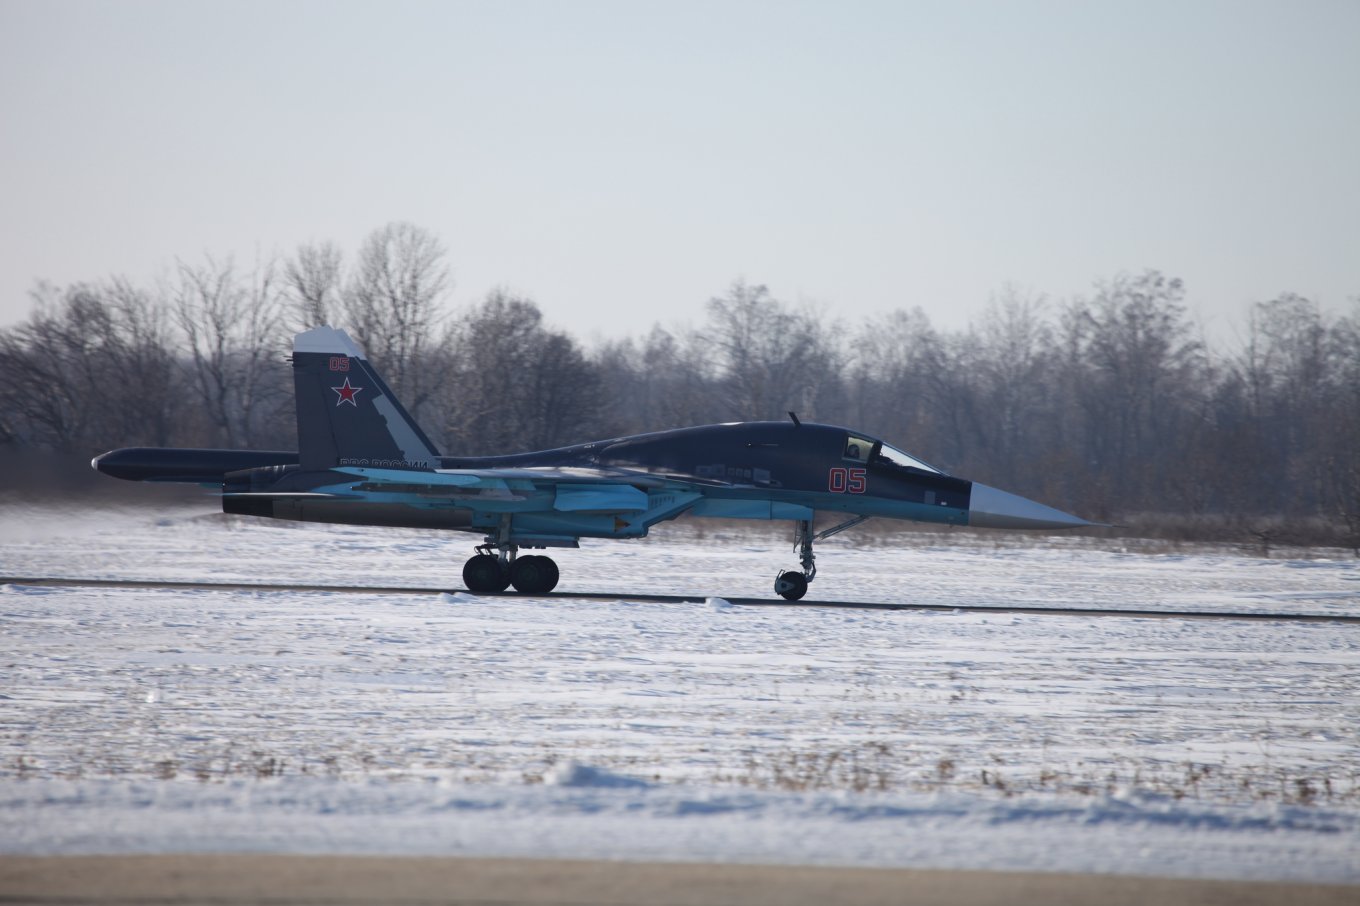 Su-34 named 05 Red